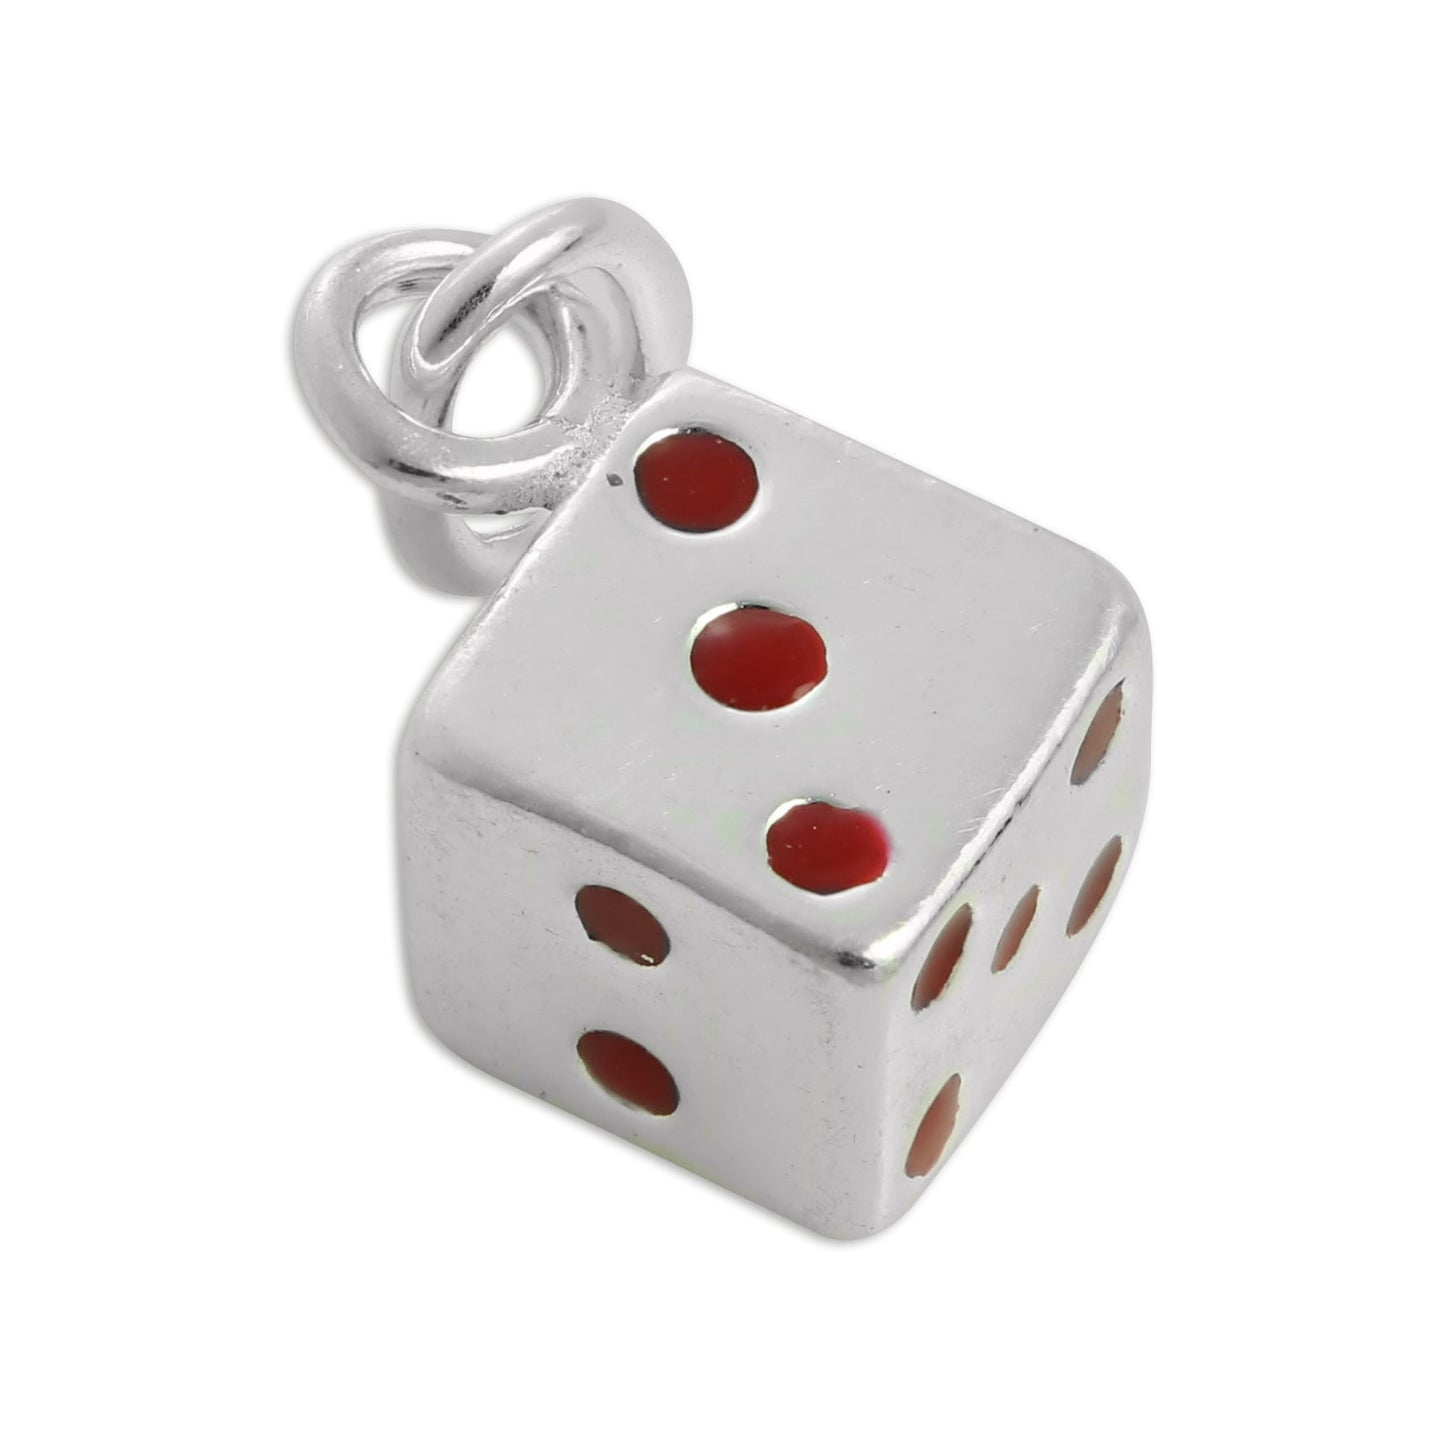 Sterling Silver & Red Enamel Dice Charm